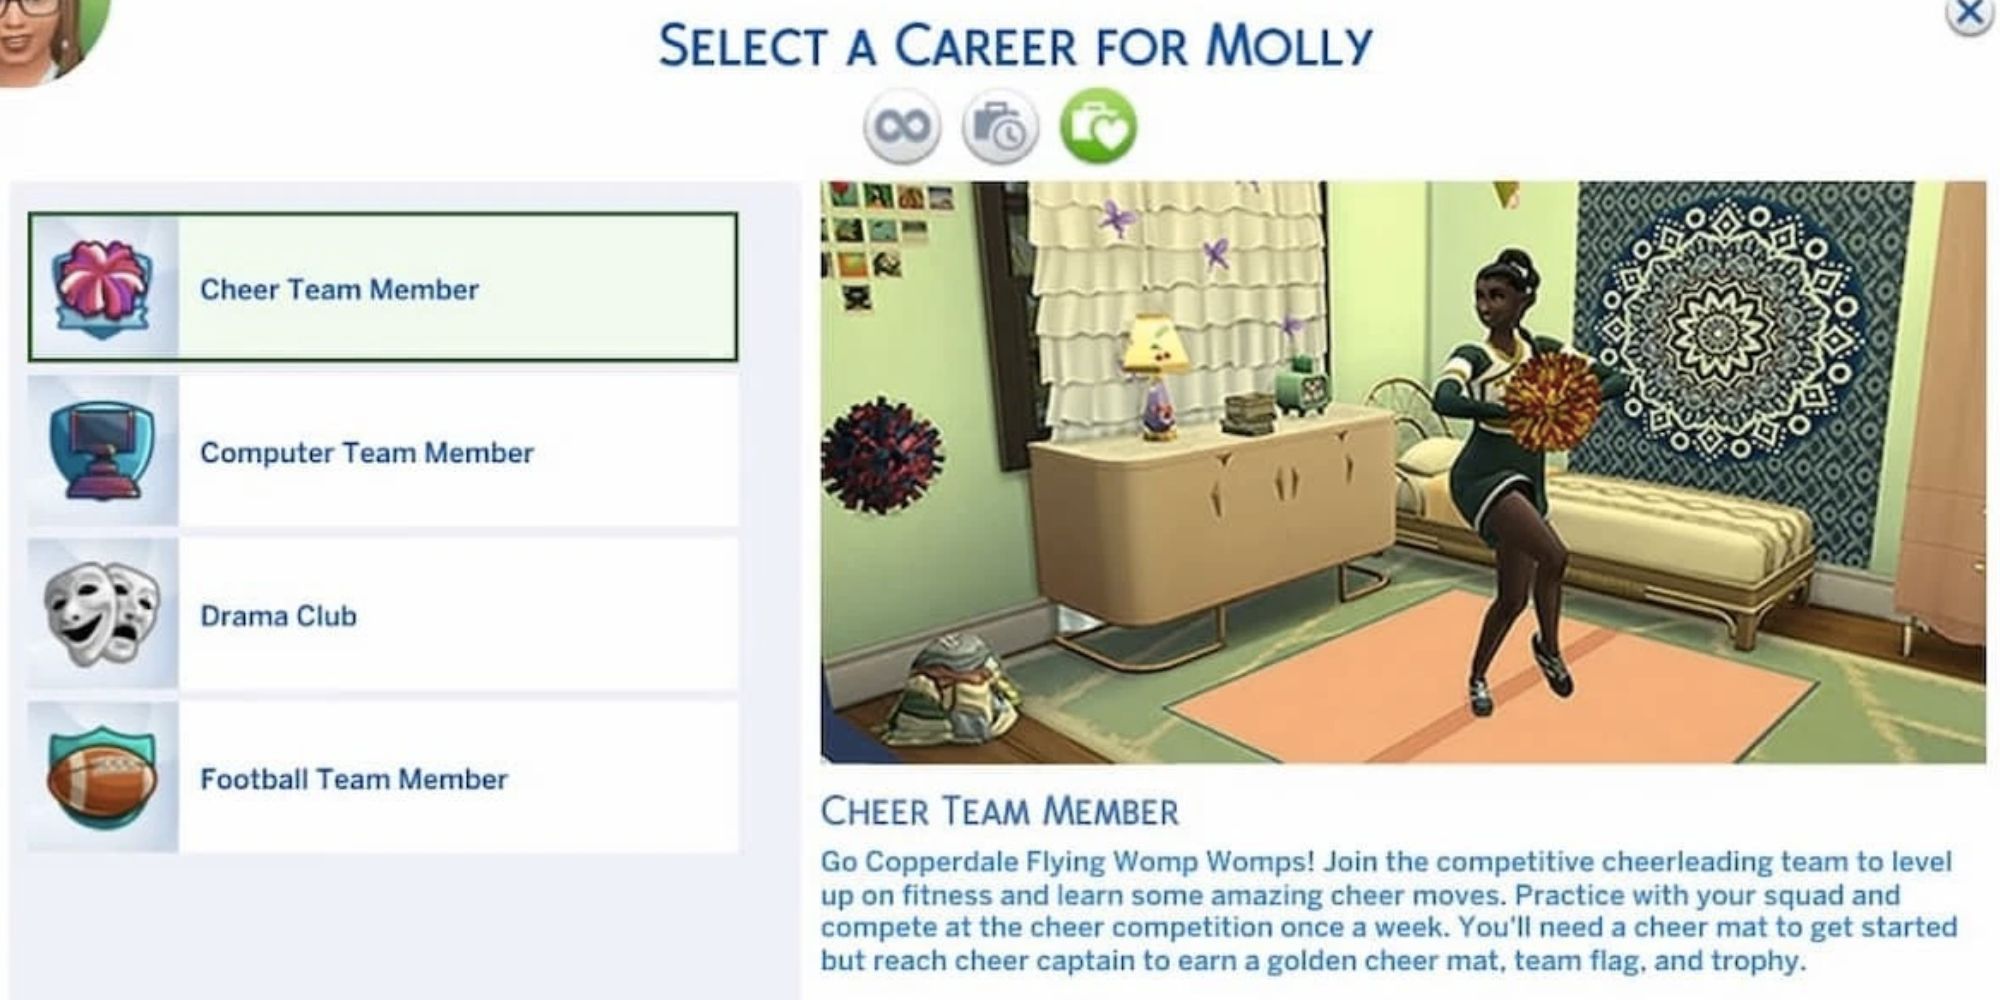 sims 4 after school activities cheat